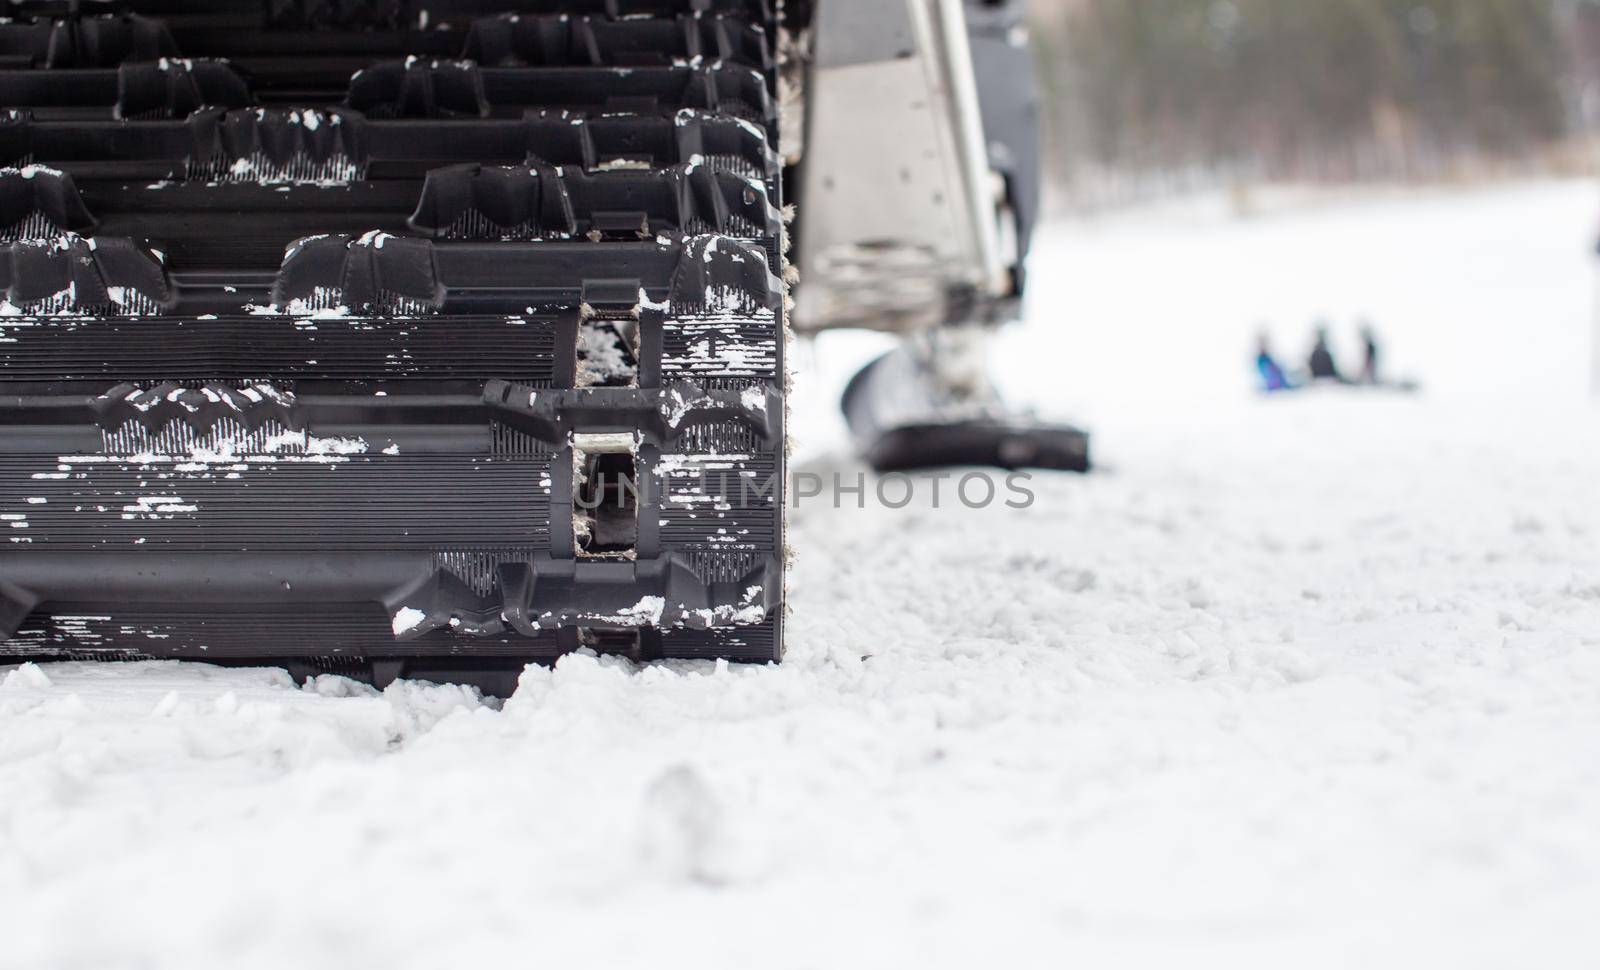 The back of the snowmobile in winter. Riding in the snow on a snowmobile. Rear suspension of a snowmobile